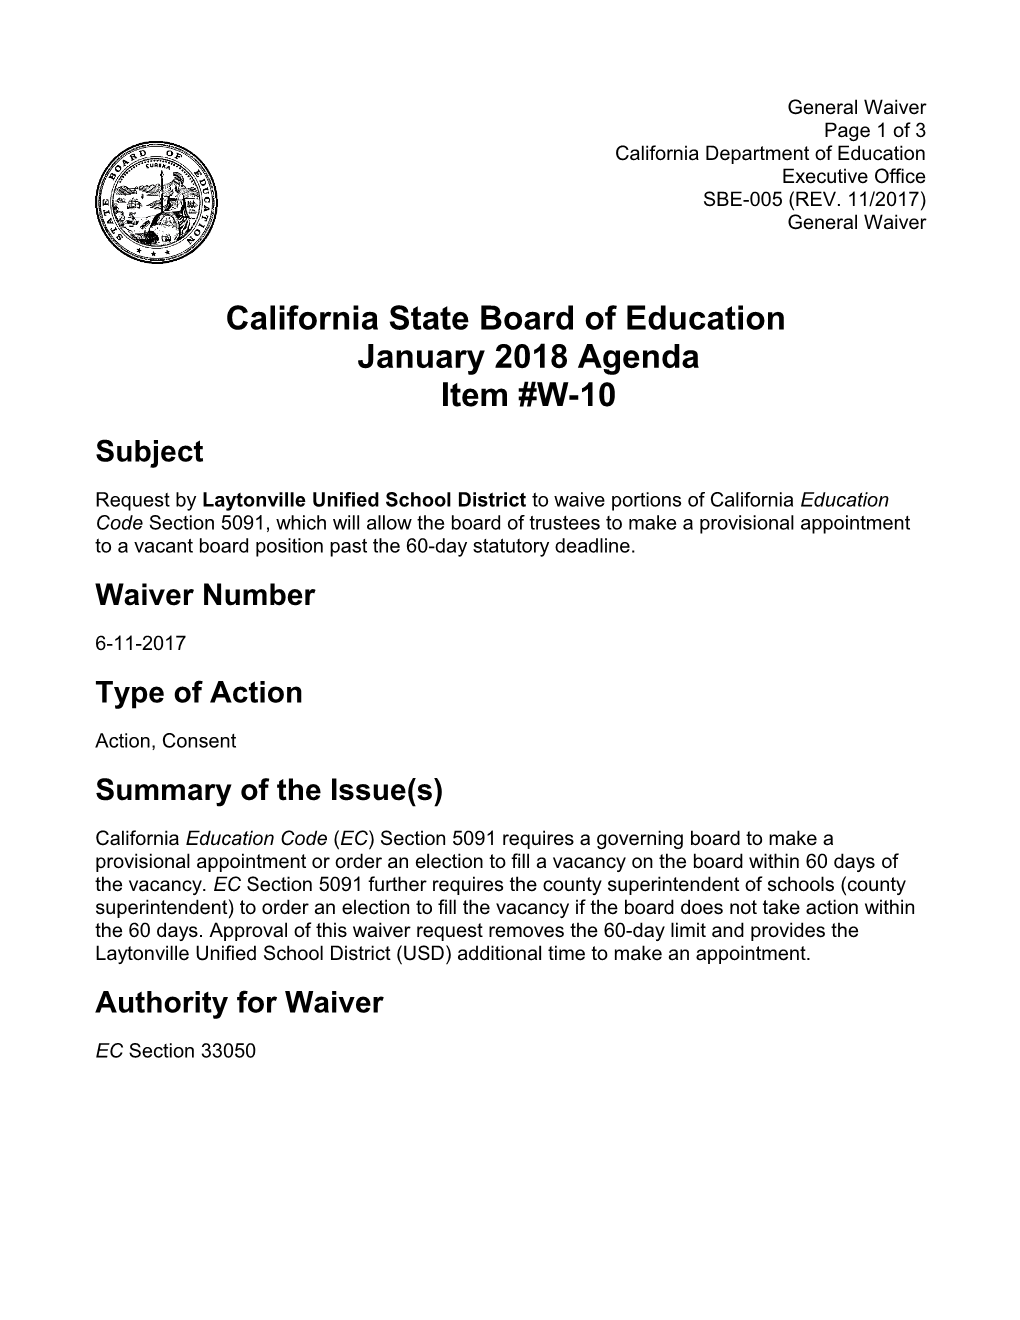 January 2018 Waiver Item W-10 - Meeting Agendas (CA State Board of Education)